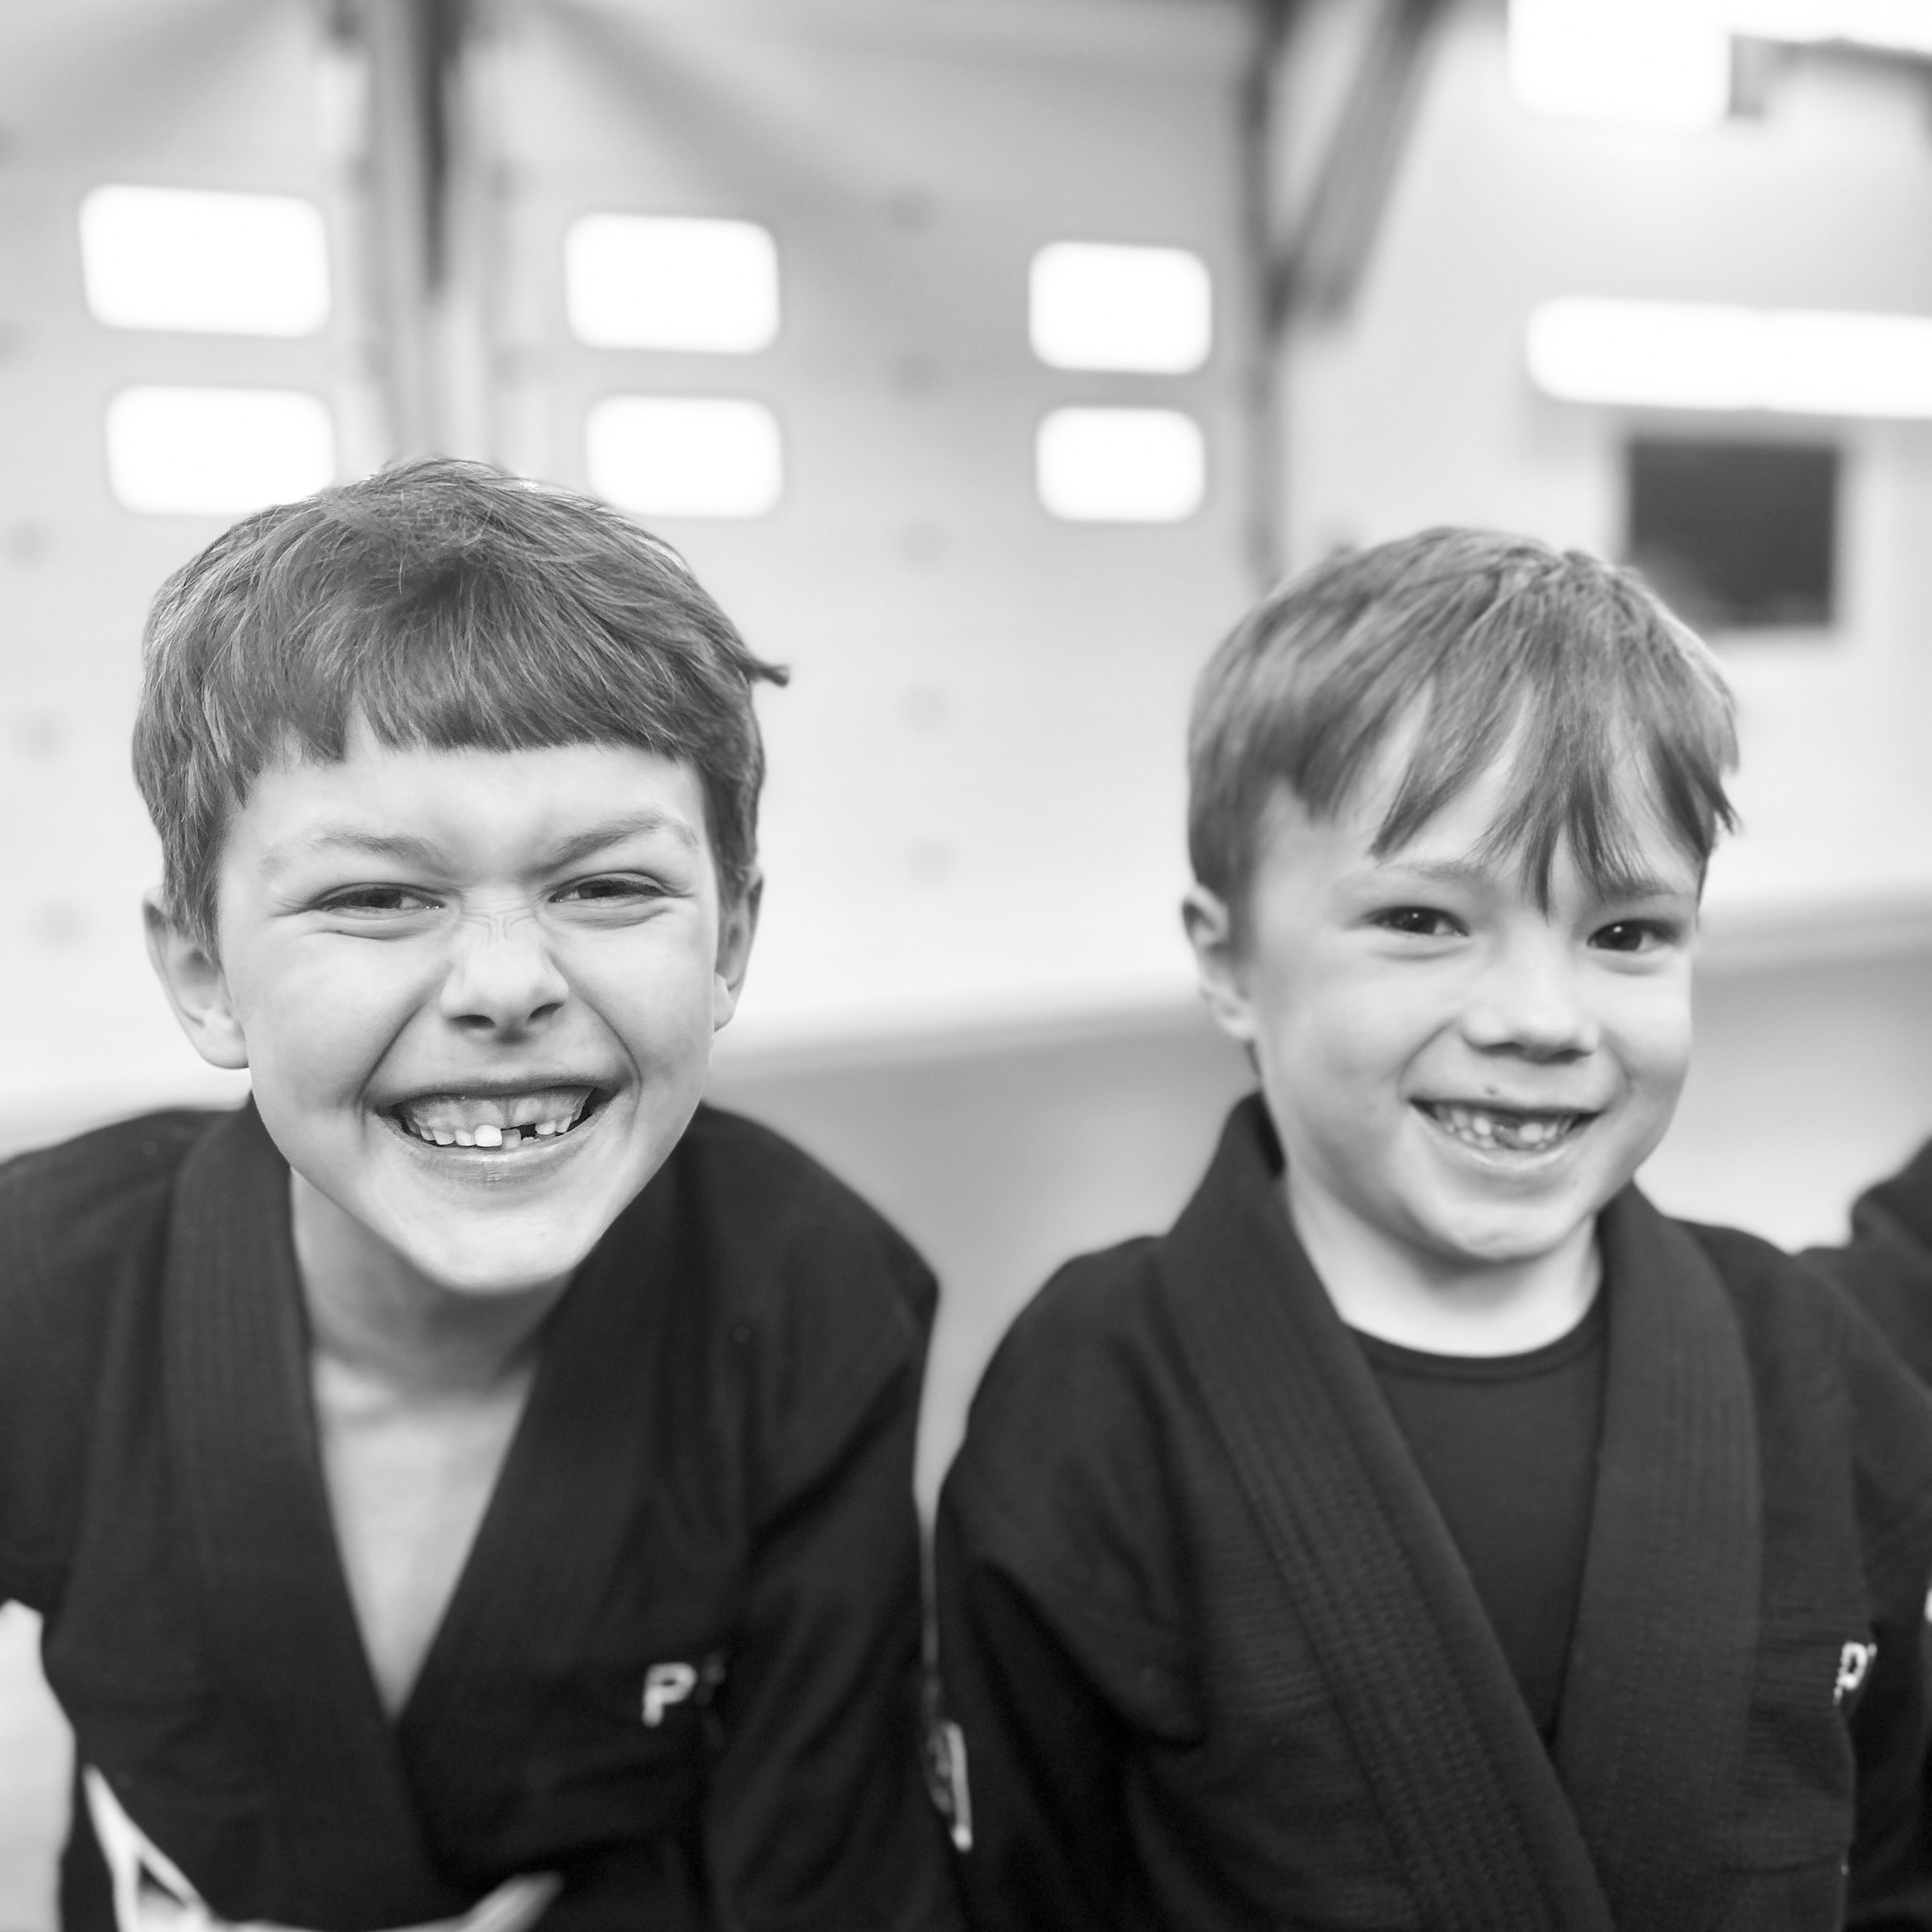 #toothless crew getting ready for small kids class!

Mondays &amp; Thursdays @ 4pm

Dm to schedule your child&rsquo;s first class!

#allsmiles #pretaacademy #cheesin #kelownakids